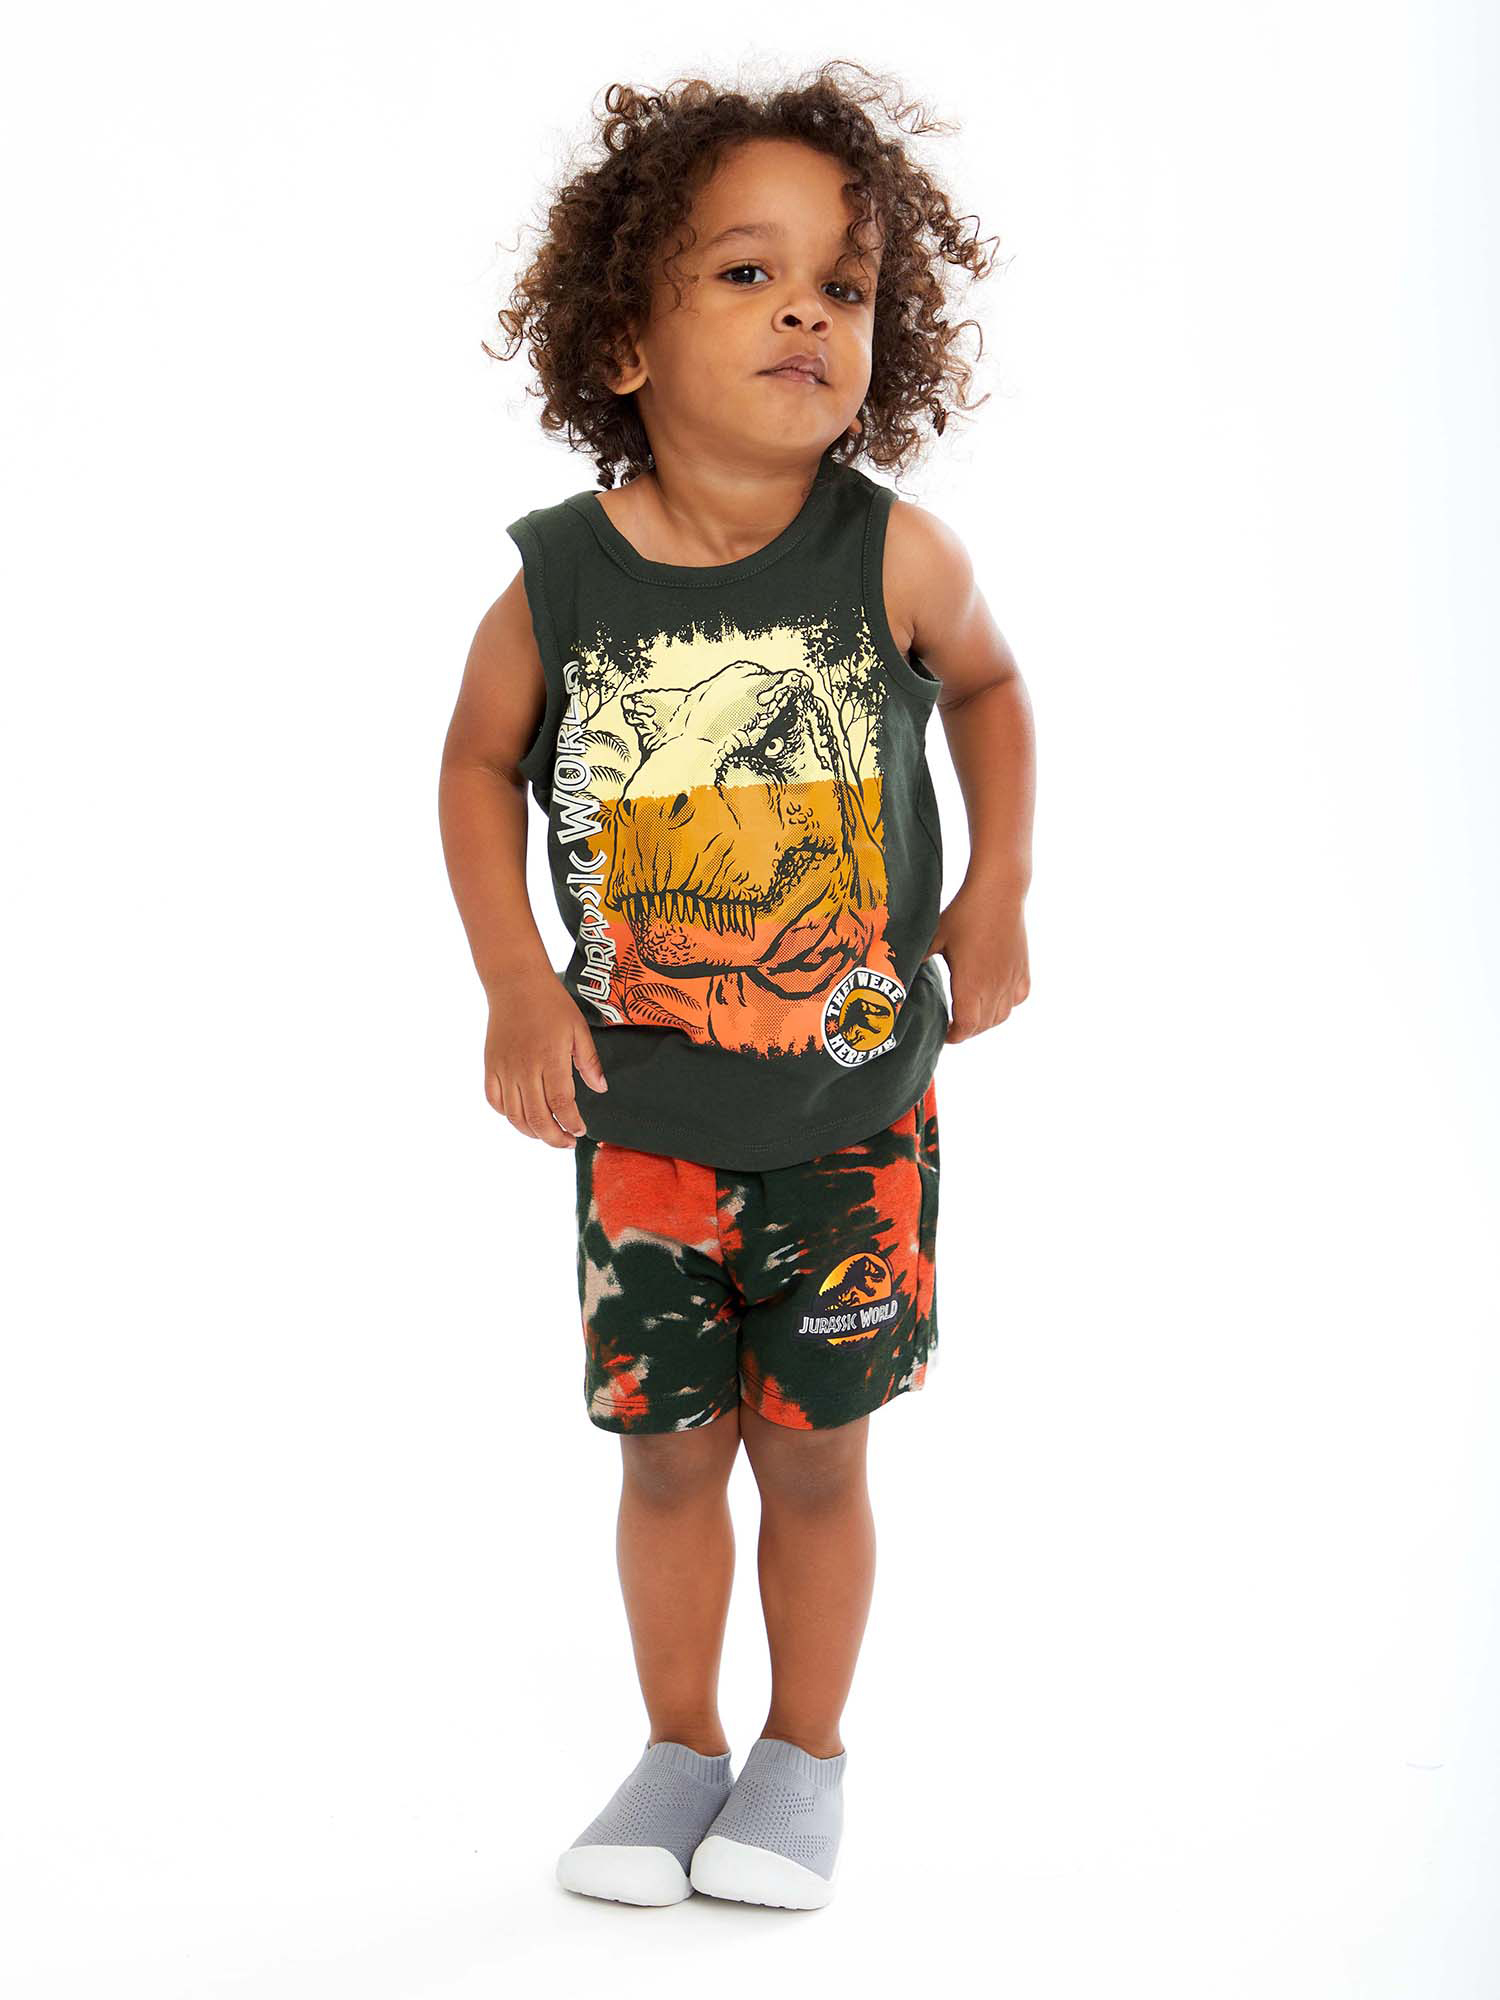 Jurassic World Toddler Boy 5-Piece Outfit Set, Sizes 12M-5T - image 4 of 11